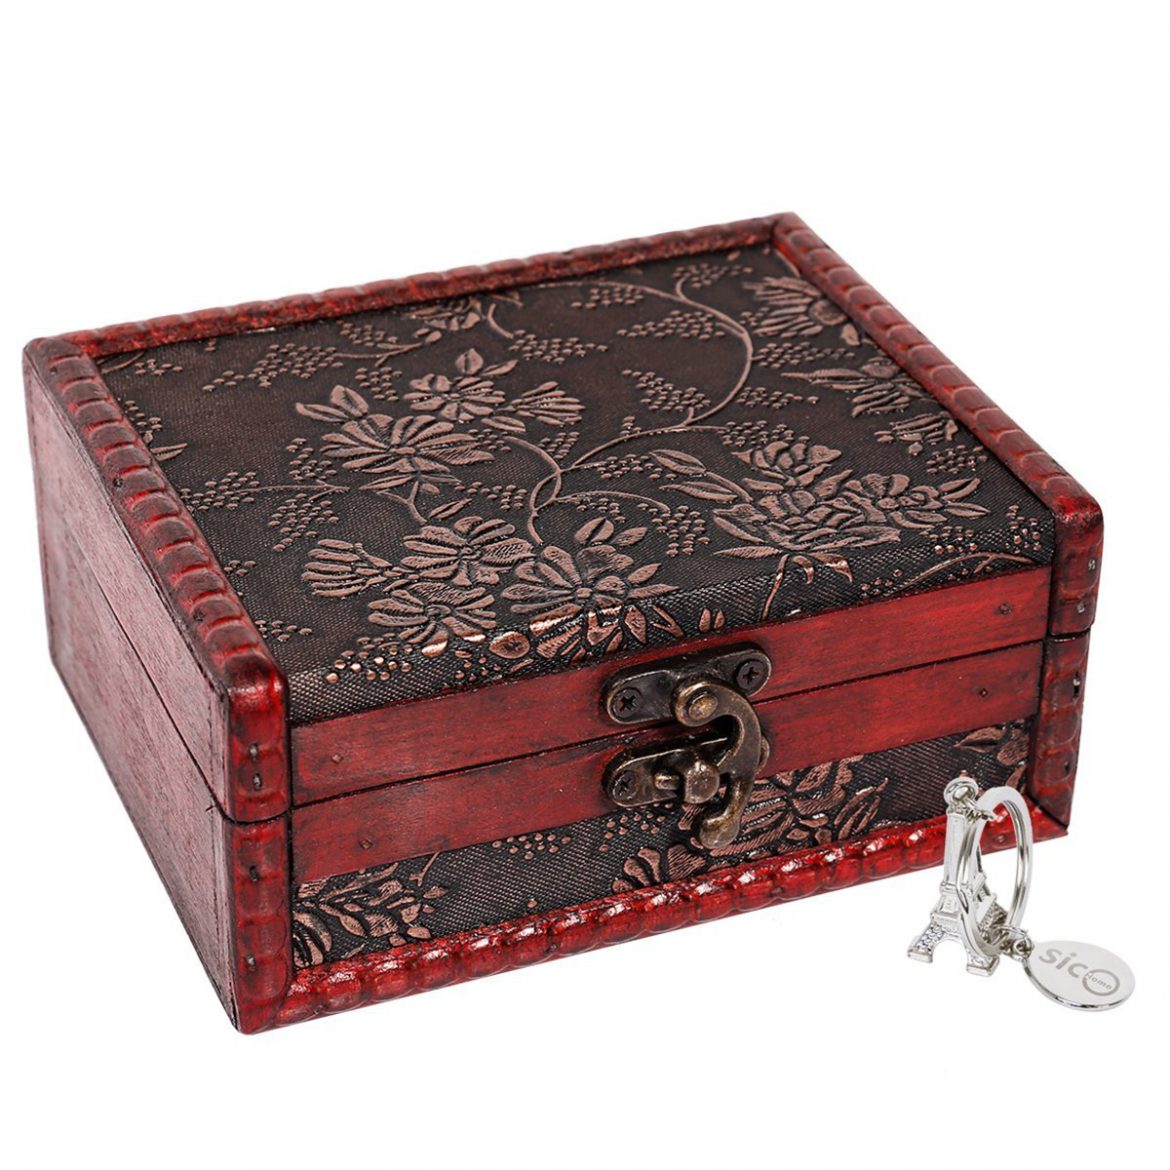 The One and Only Exceptional and Unique Jewelry Boxes Wholesale: